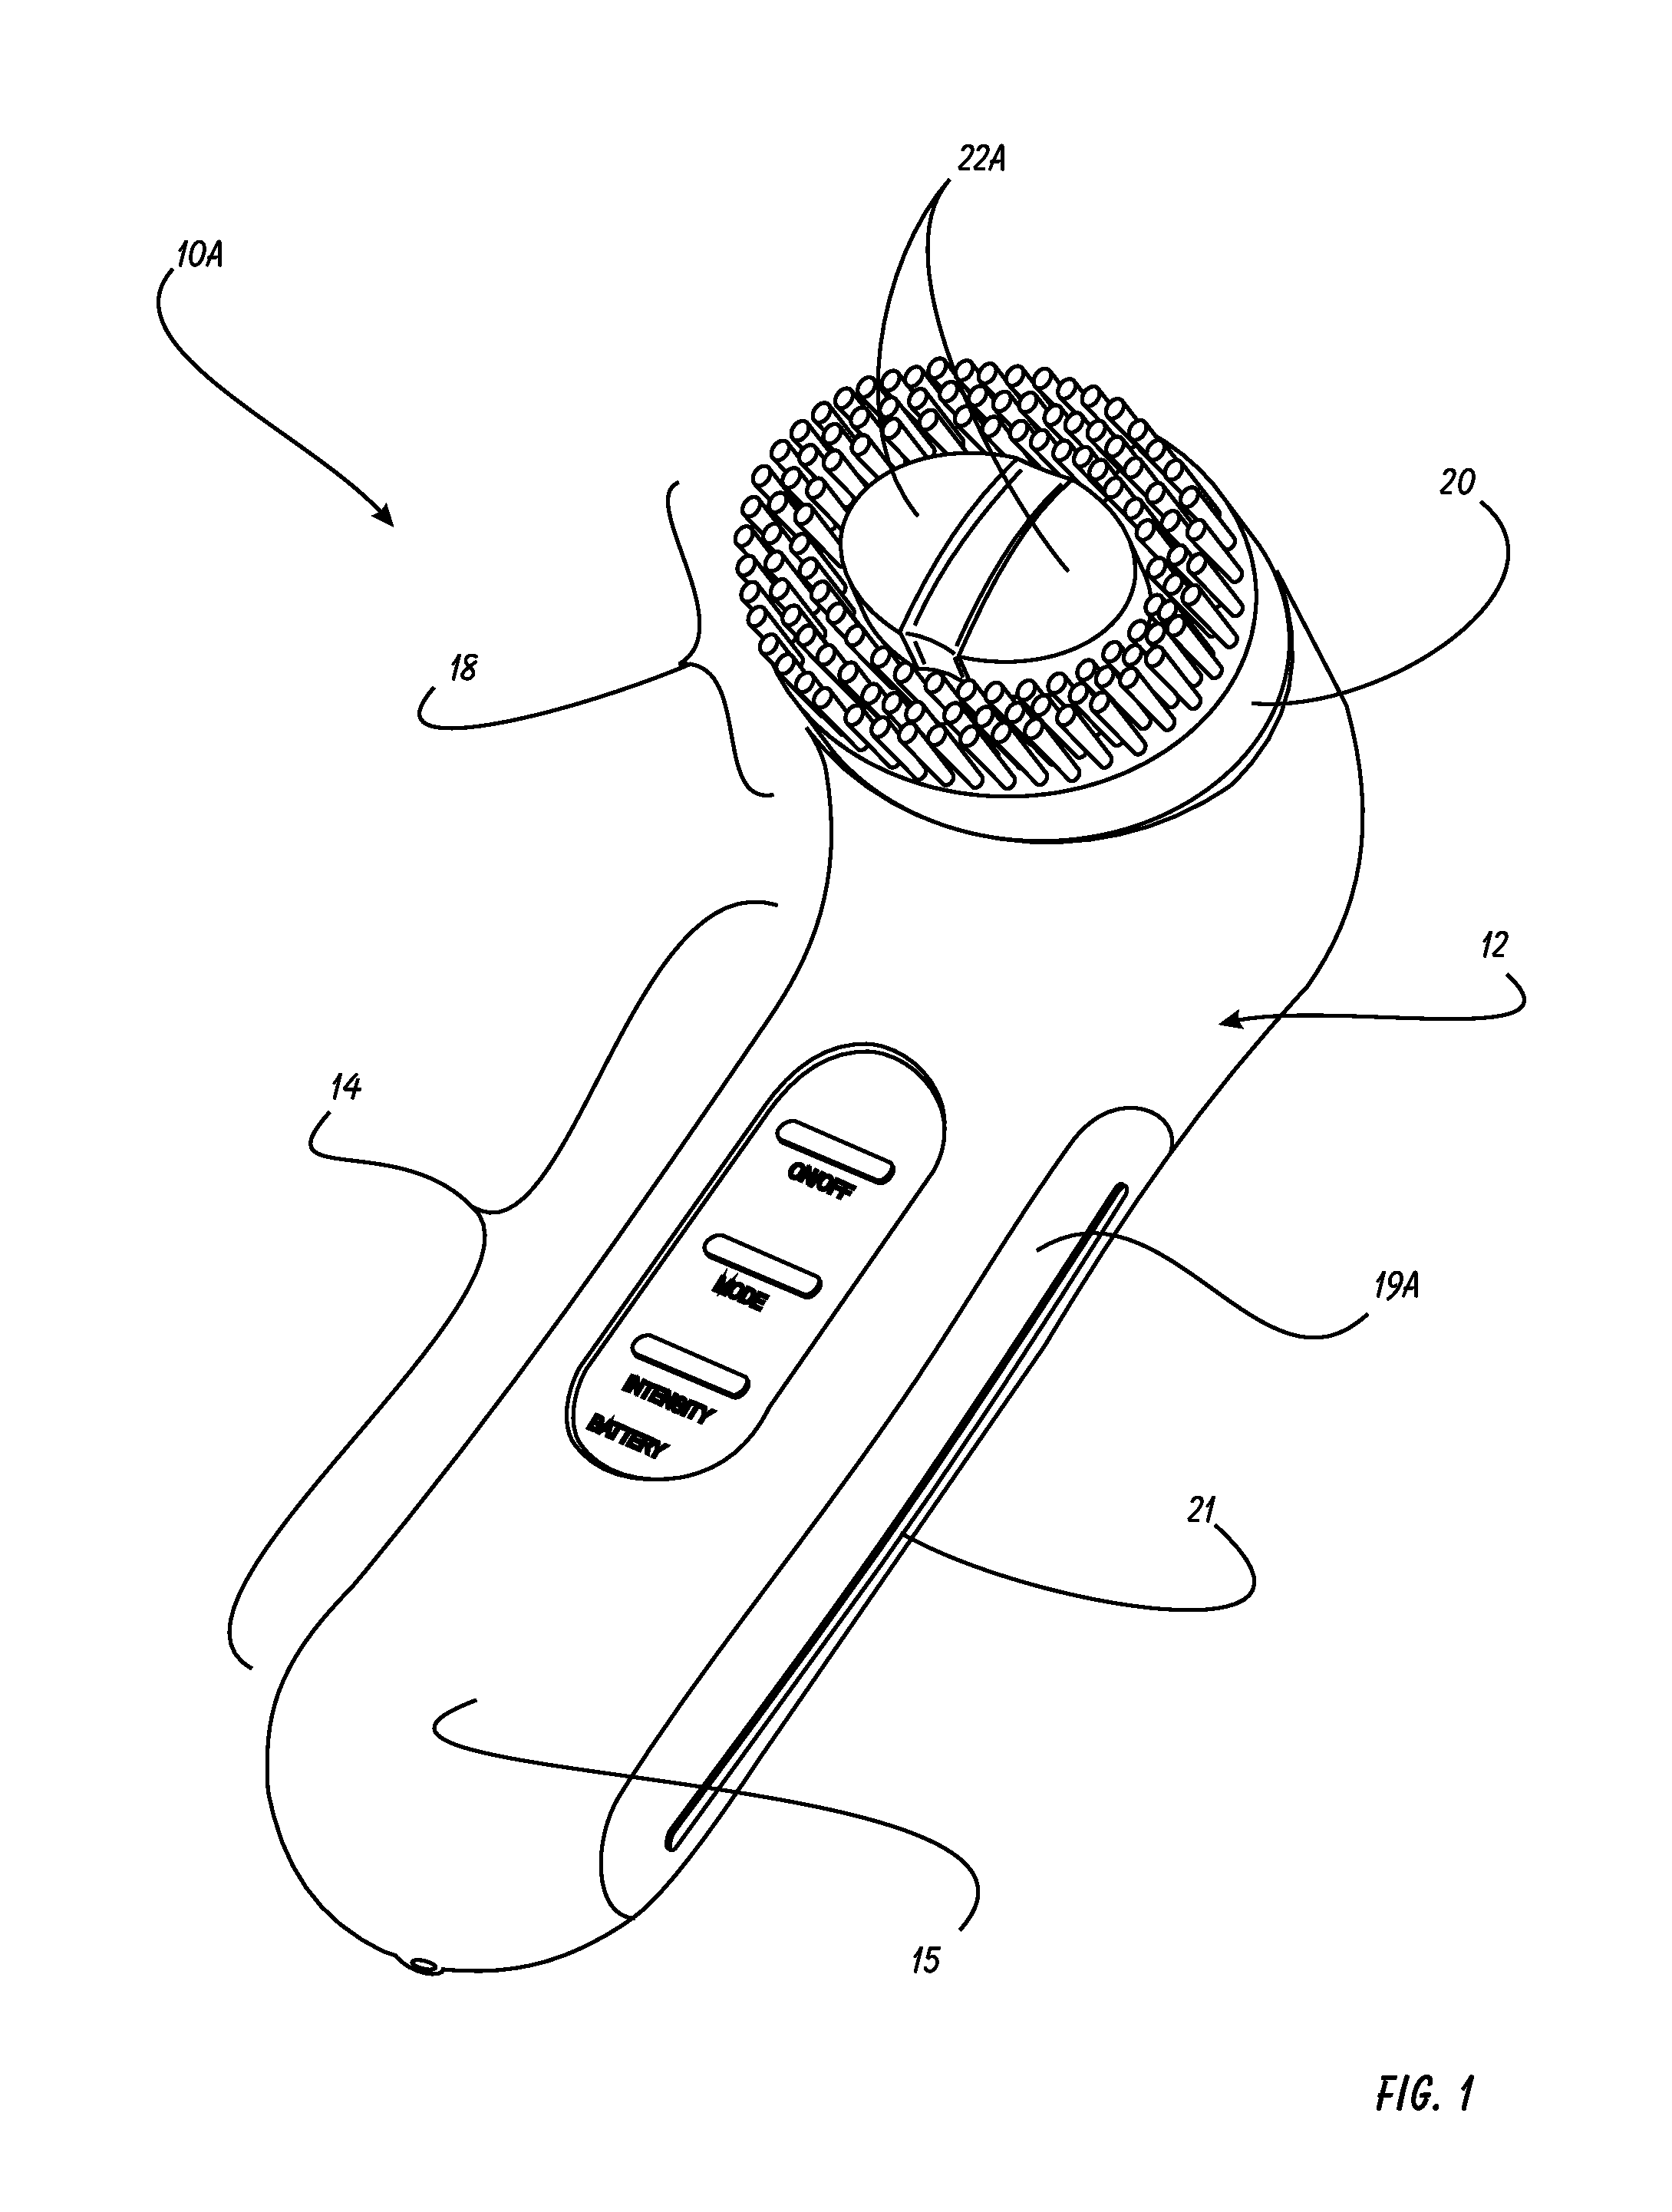 Handheld Facial Massage and Microcurrent Therapy Device